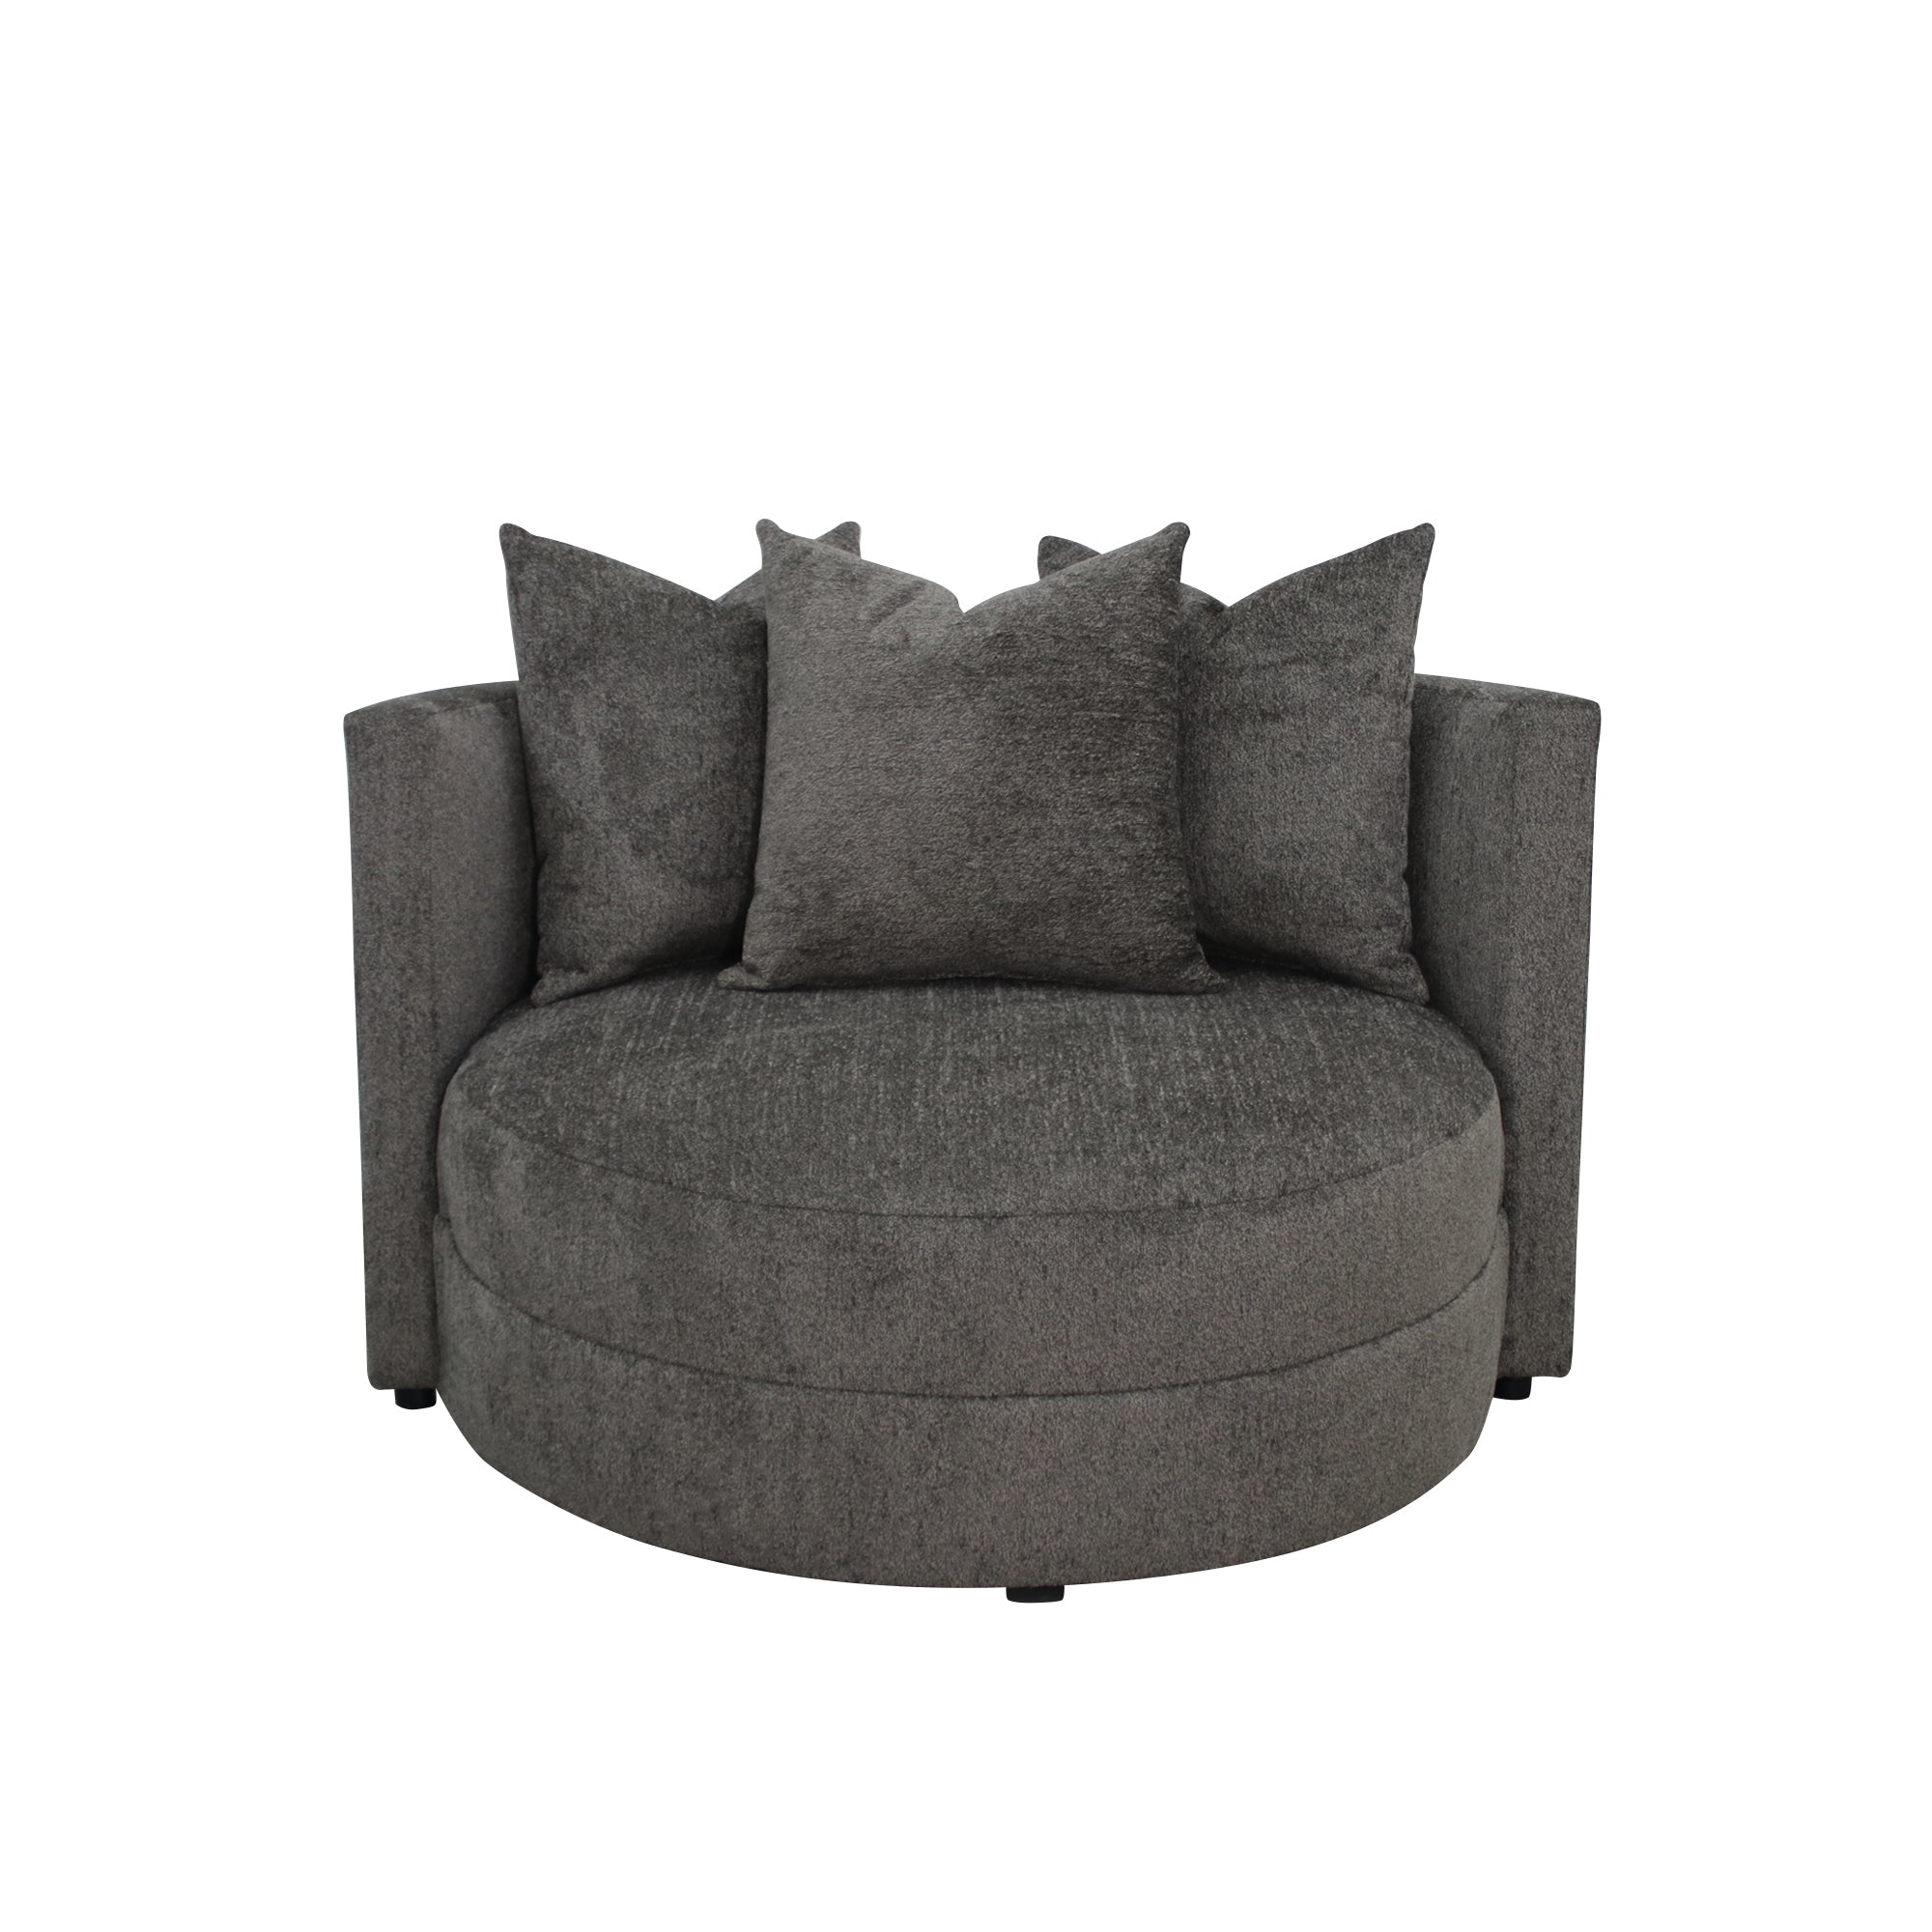 Round Seating Upholstered Living Room Chair